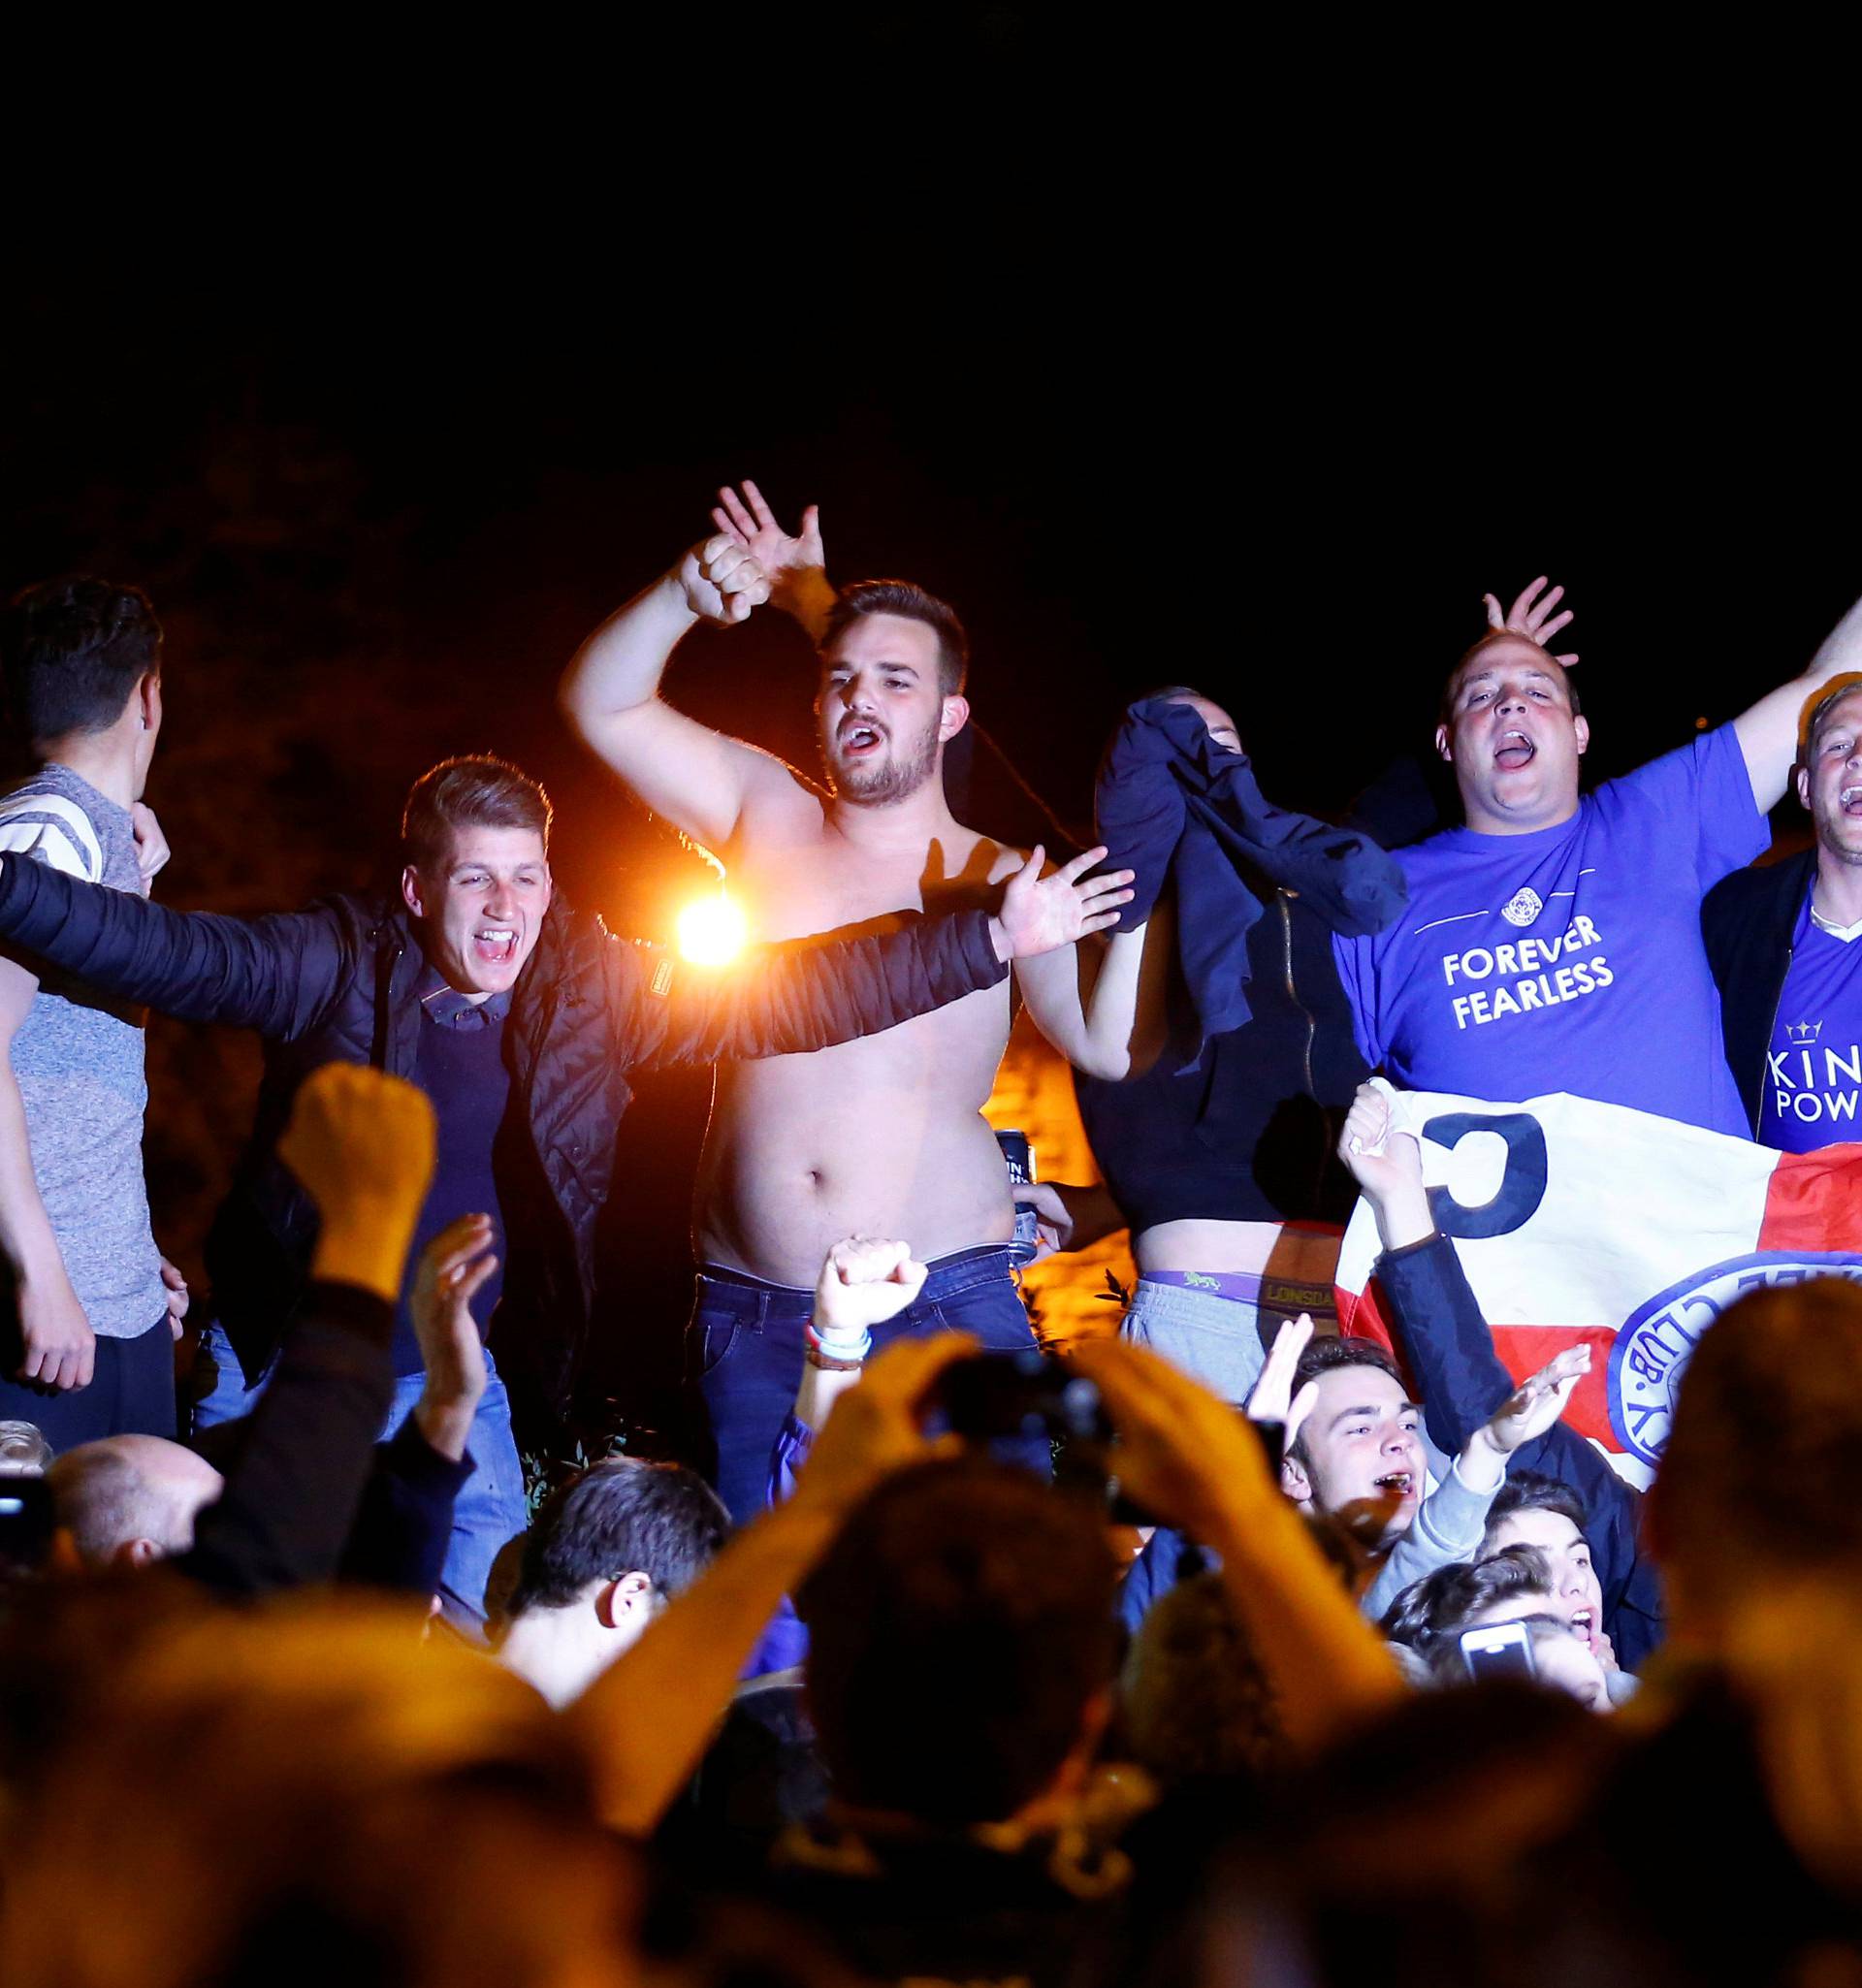 Leicester City fans celebrate their team winning the English Premier League outside the home of player Jamie Vardy in Melton Mowbray